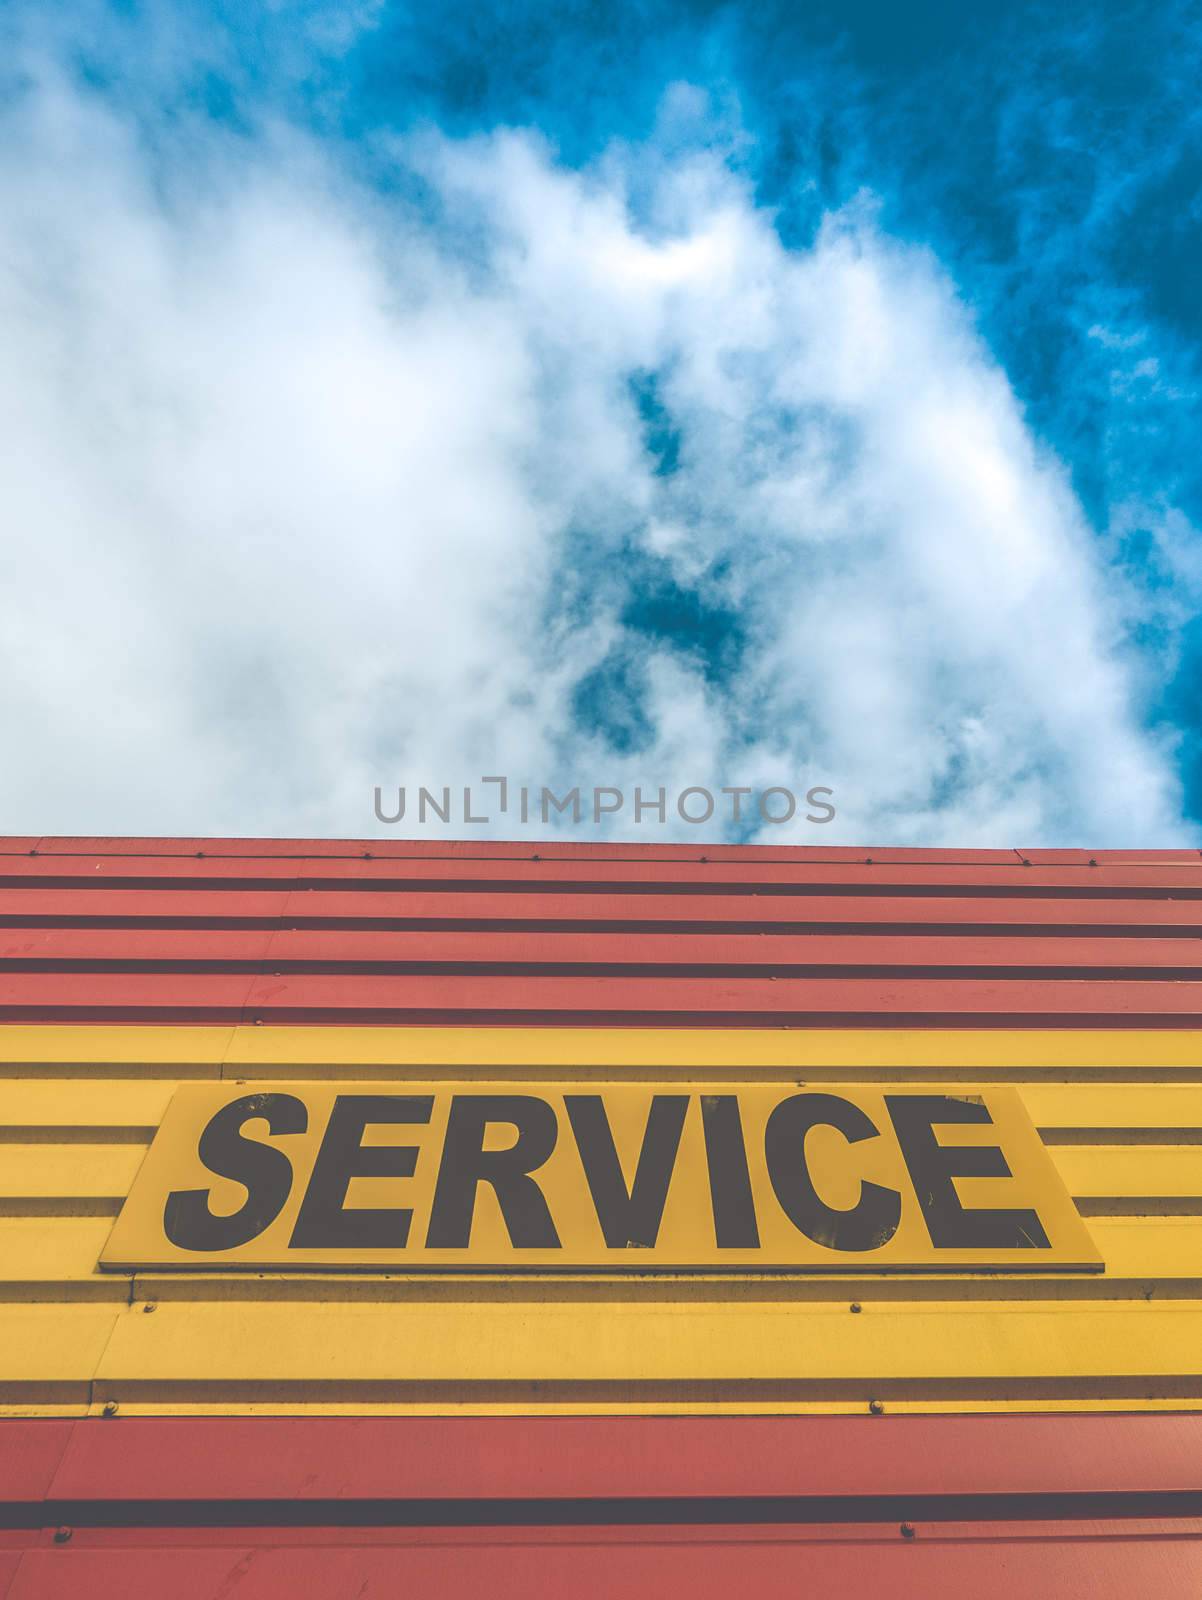 Retro Style Auto Repair Shop Or Garage With Service Sign